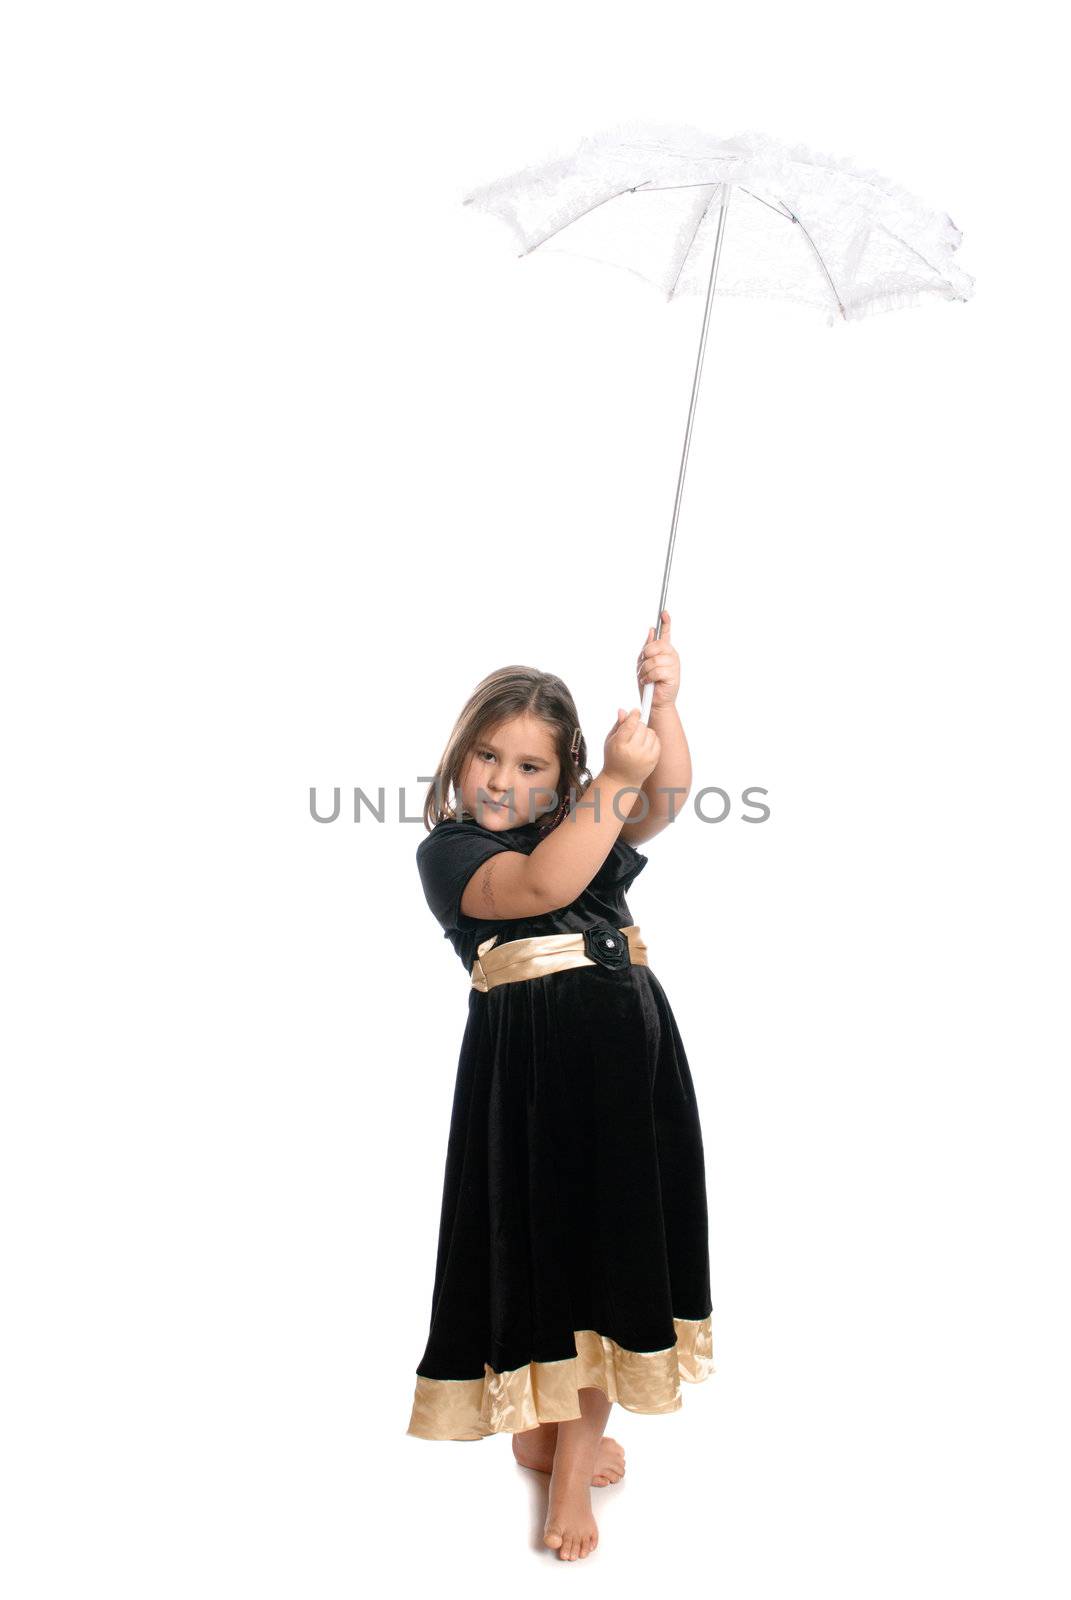 A young female child is holding a lace umbrella, isolated against a white background.